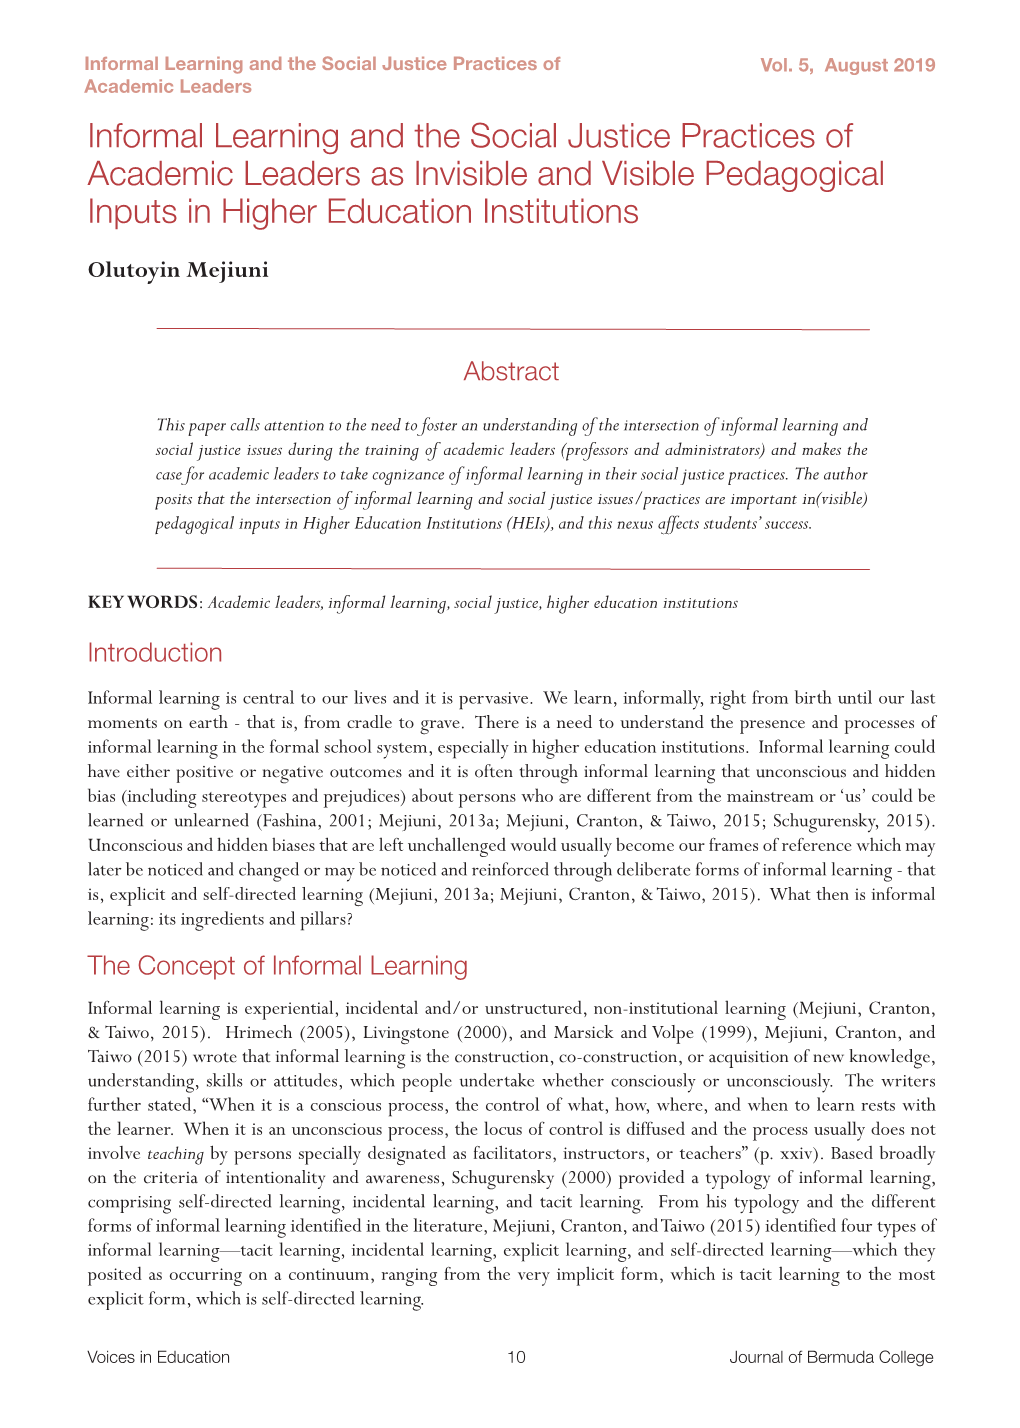 Informal Learning and the Social Justice Practices of Academic Leaders As Invisible and Visible Pedagogical Inputs in Higher Education Institutions